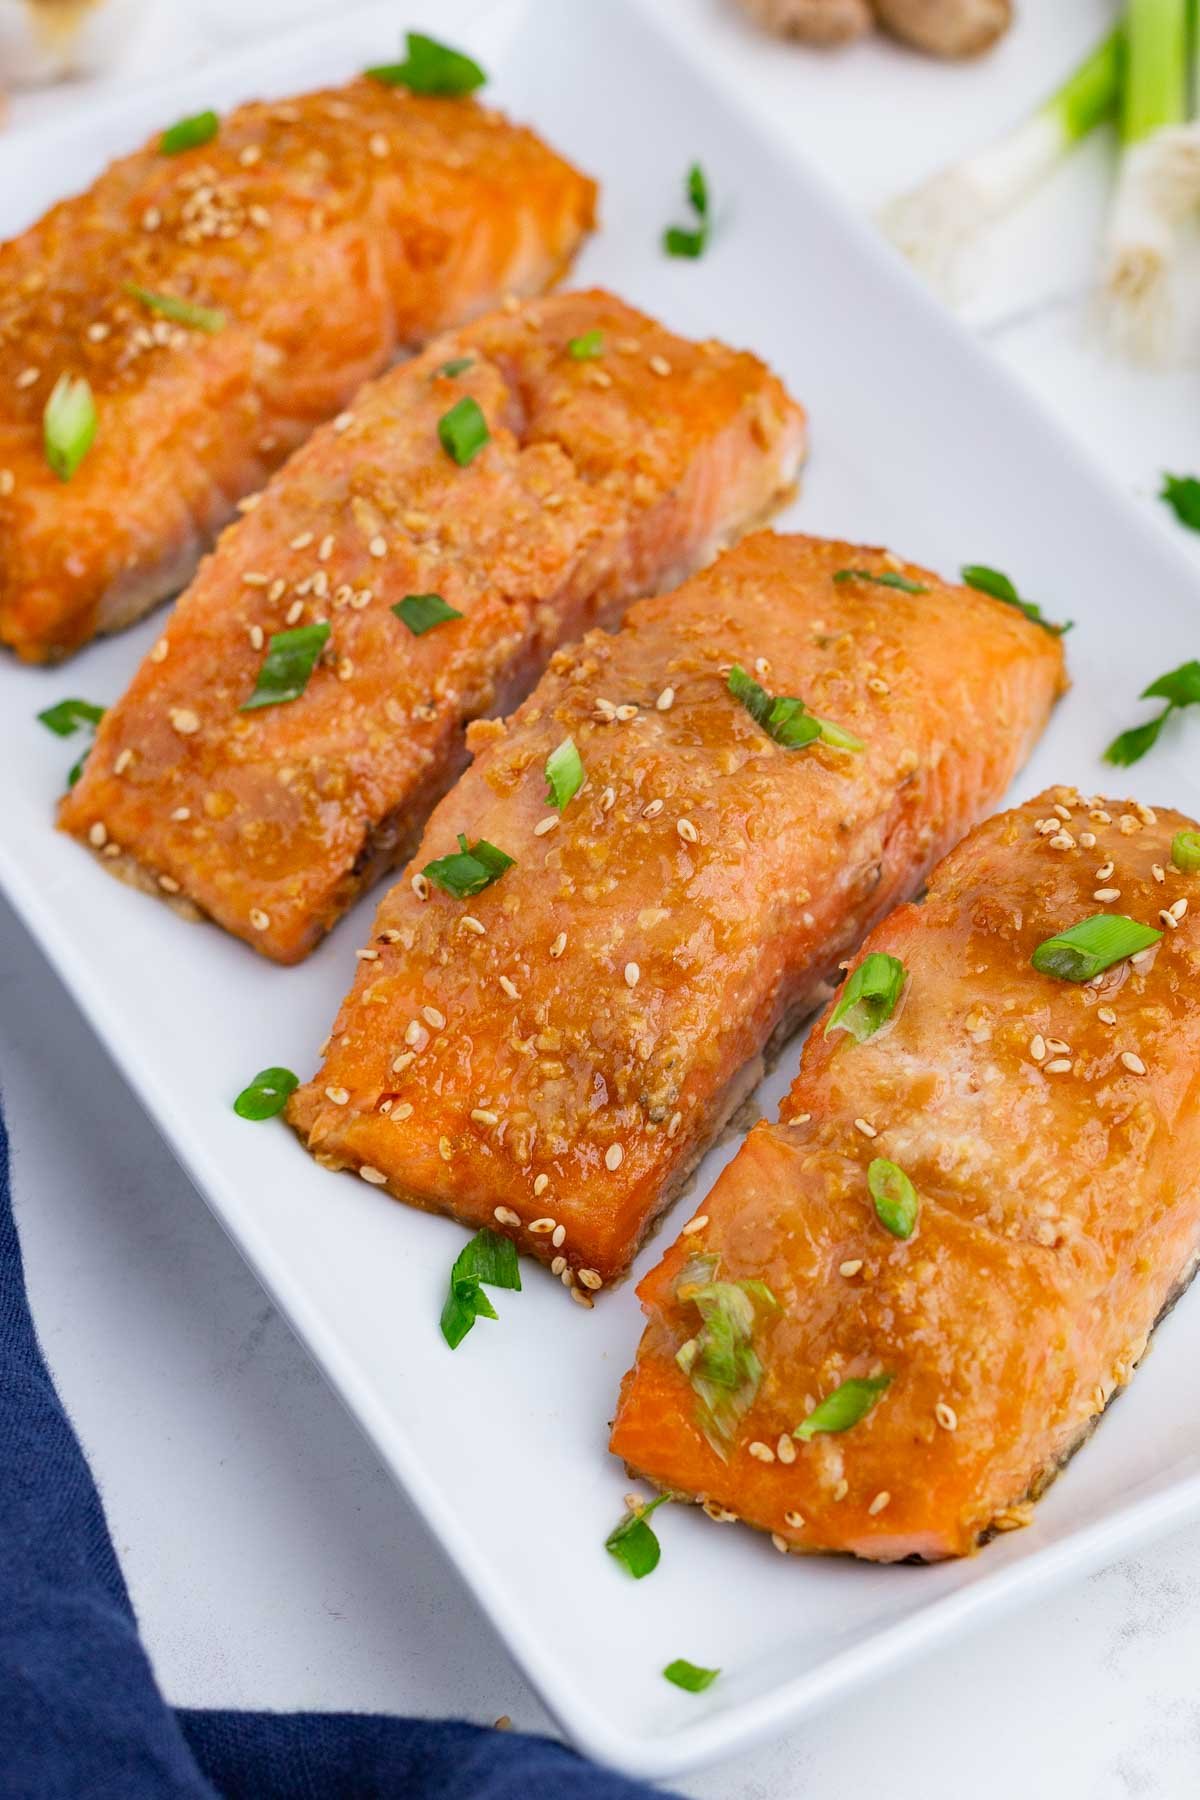 Four salmon filets are served on a white dish.